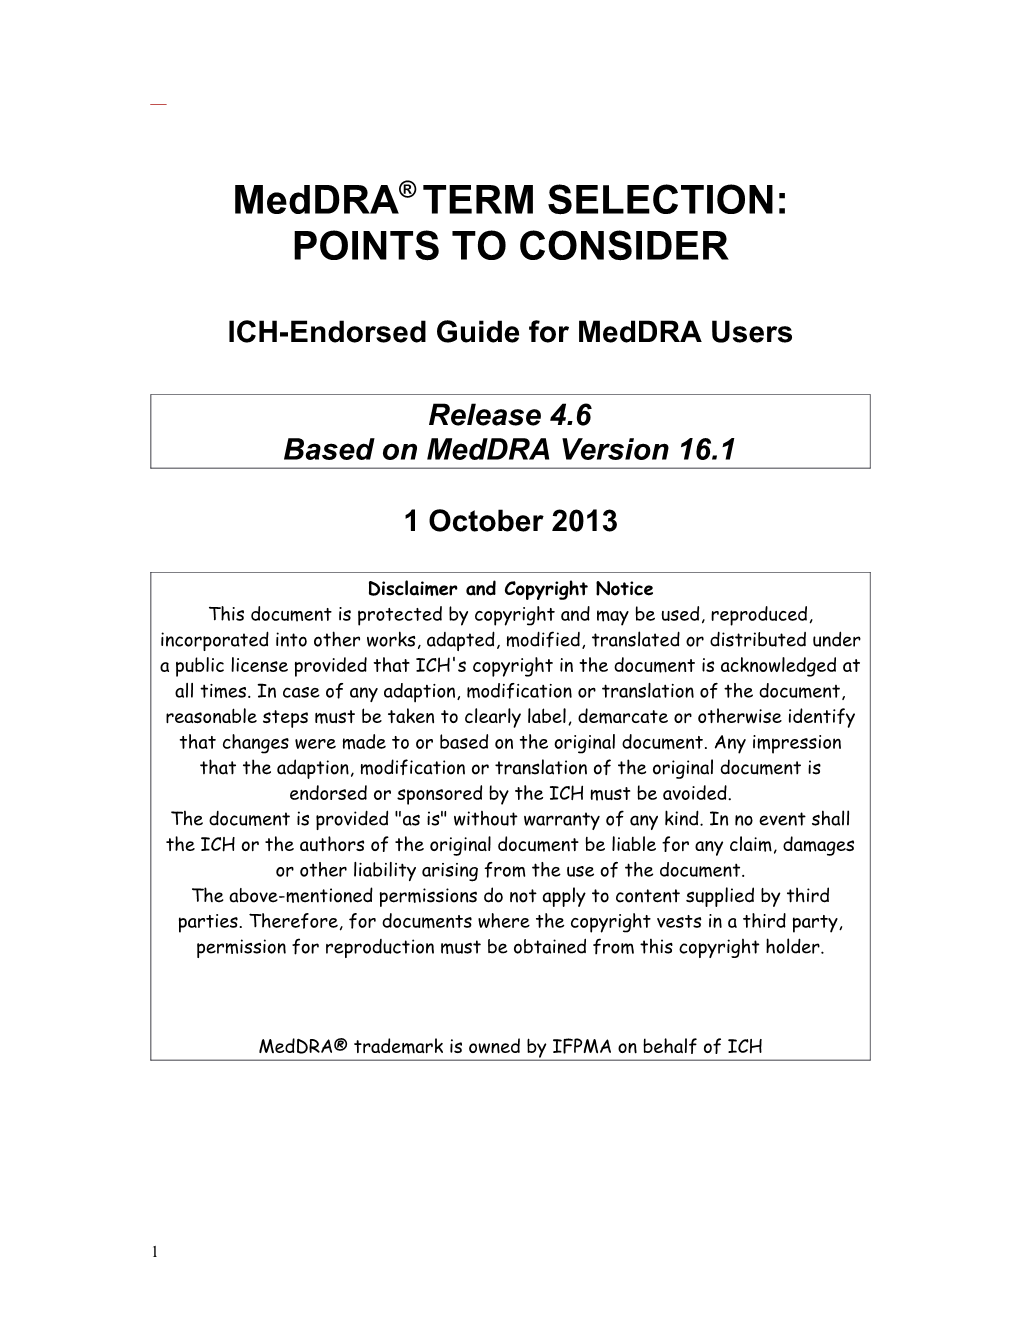 Meddra TERM SELECTION: POINTS to CONSIDER